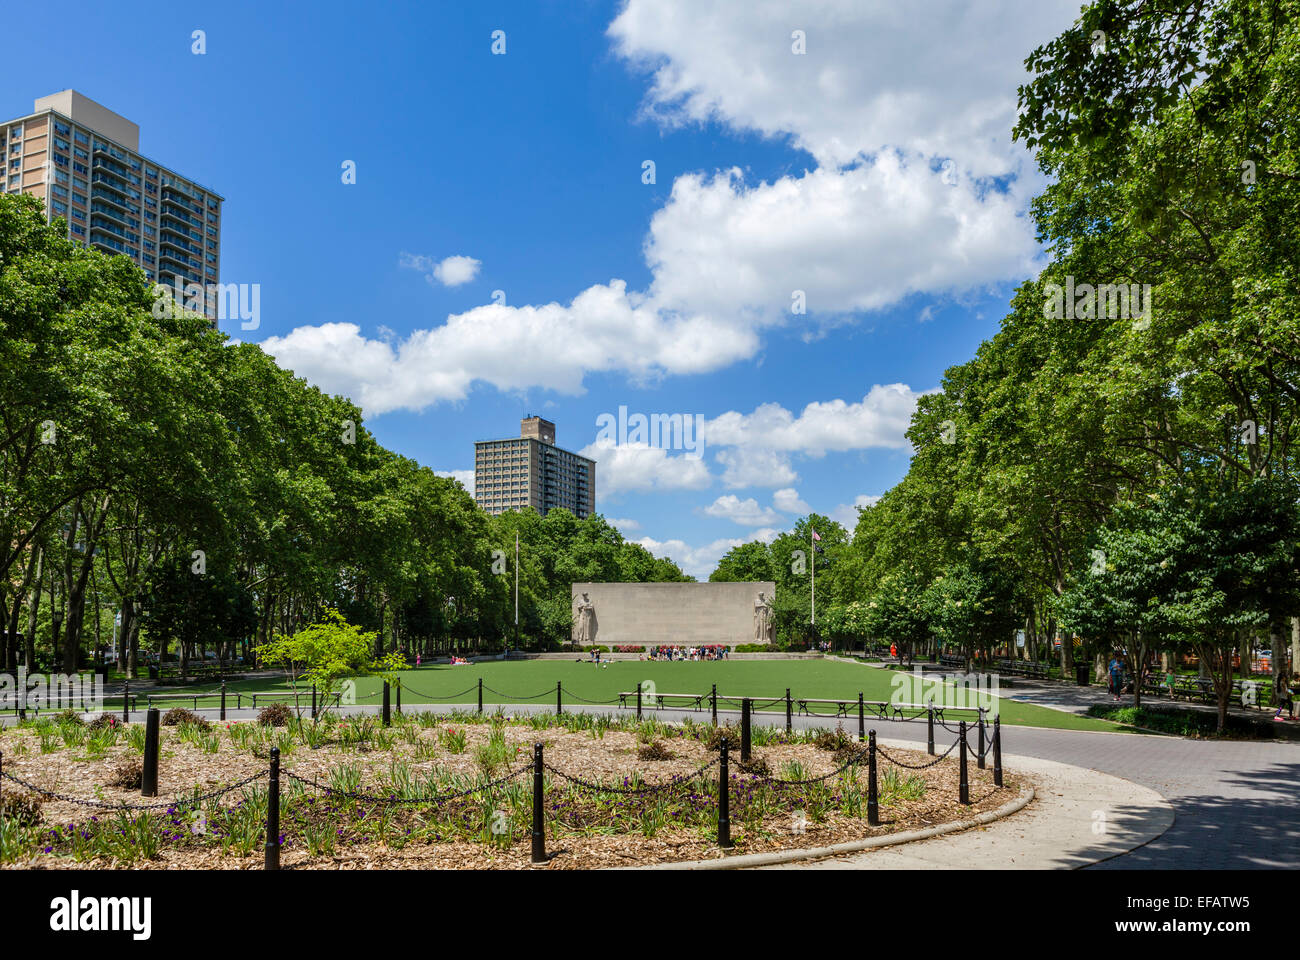 Cadman Plaza Park looking towards the WWII War Memorial, Downtown Brooklyn/Brooklyn Heights, New York City, NY, USA Stock Photo